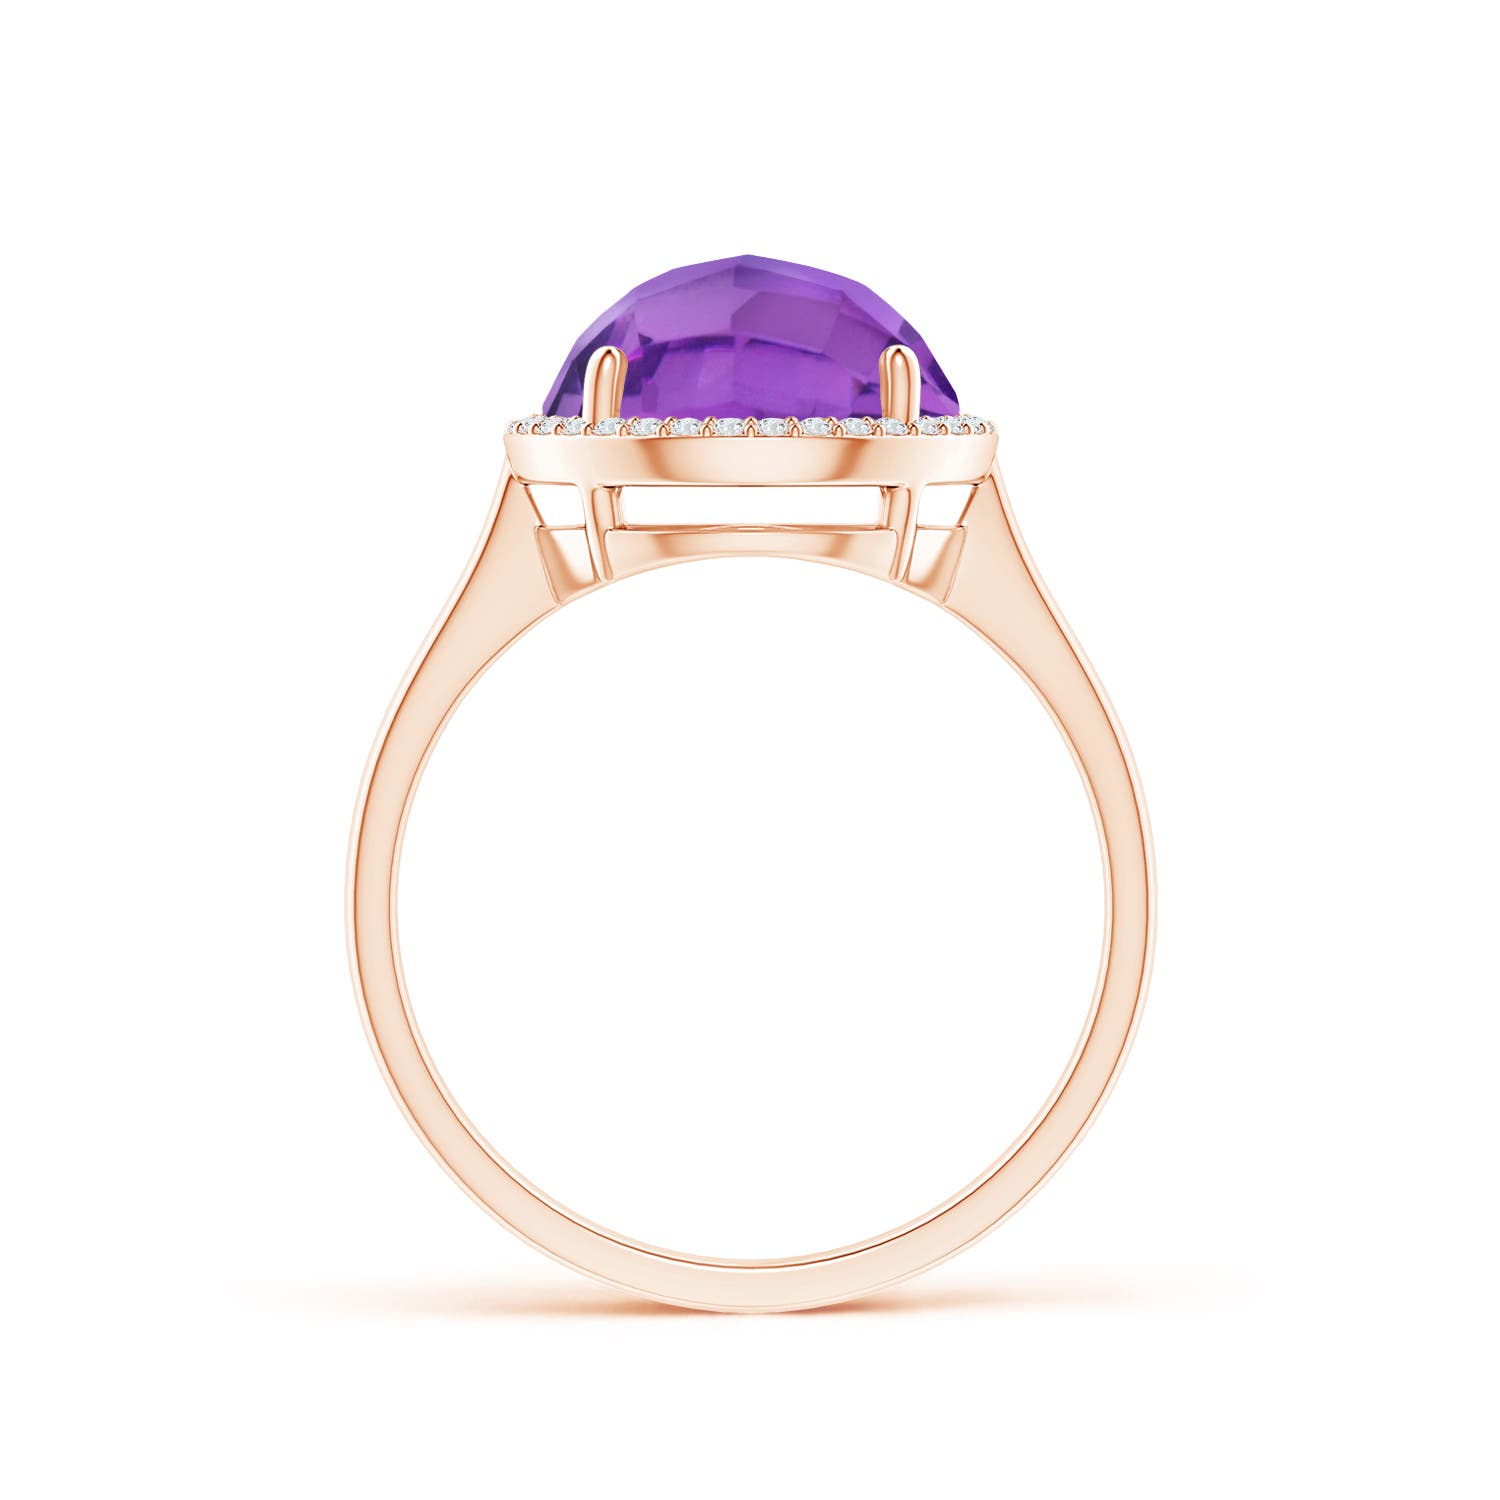 AA - Amethyst / 3.77 CT / 14 KT Rose Gold